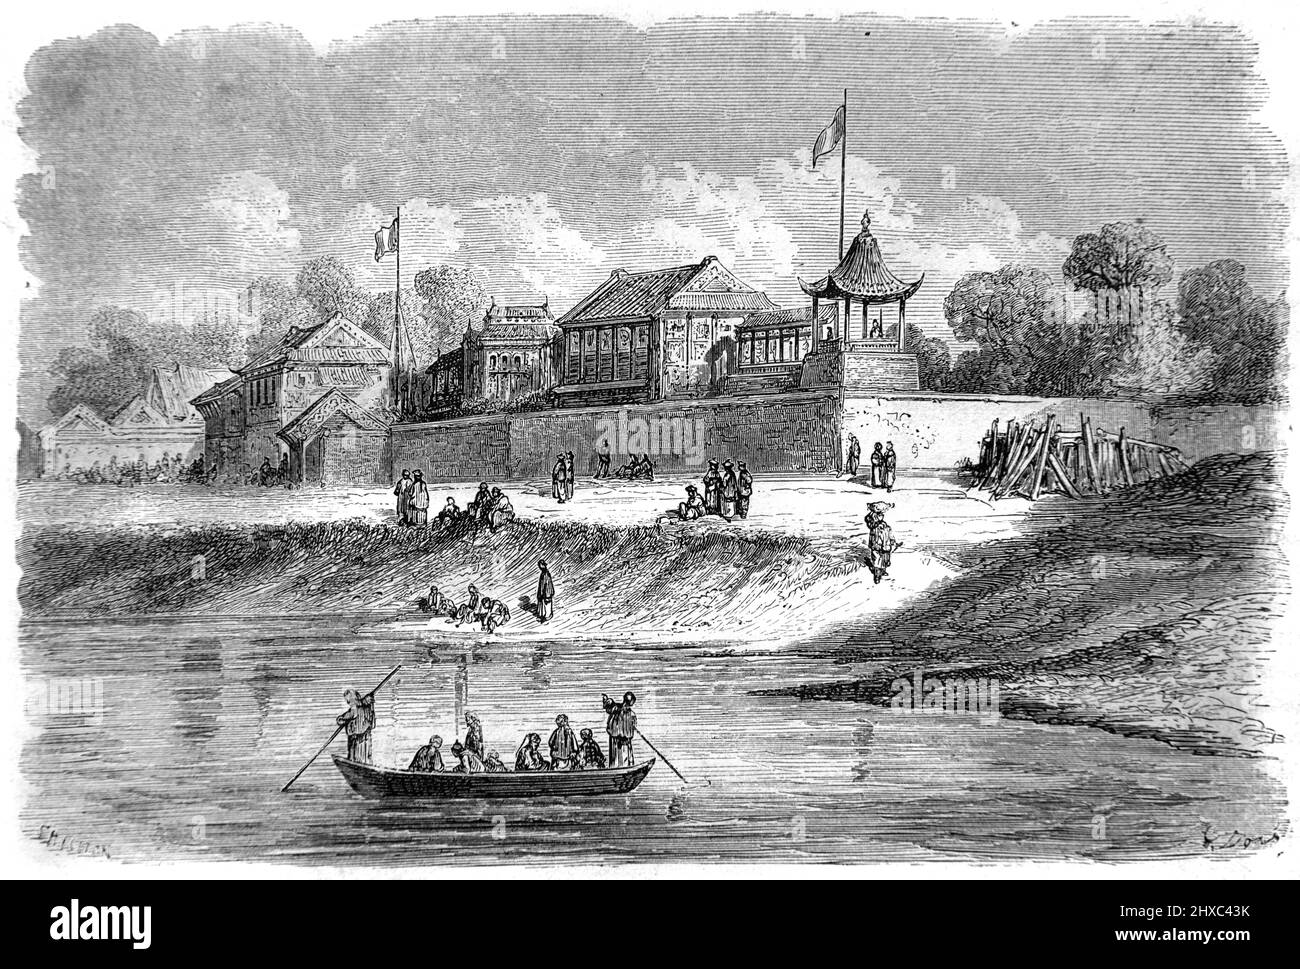 French & British Ambassador's Residences in Tianjin or Tientsin on the Shore, Coast or Waterfront of the Bohais Sea China. Vintage Illustration or Engraving 1860. Stock Photo